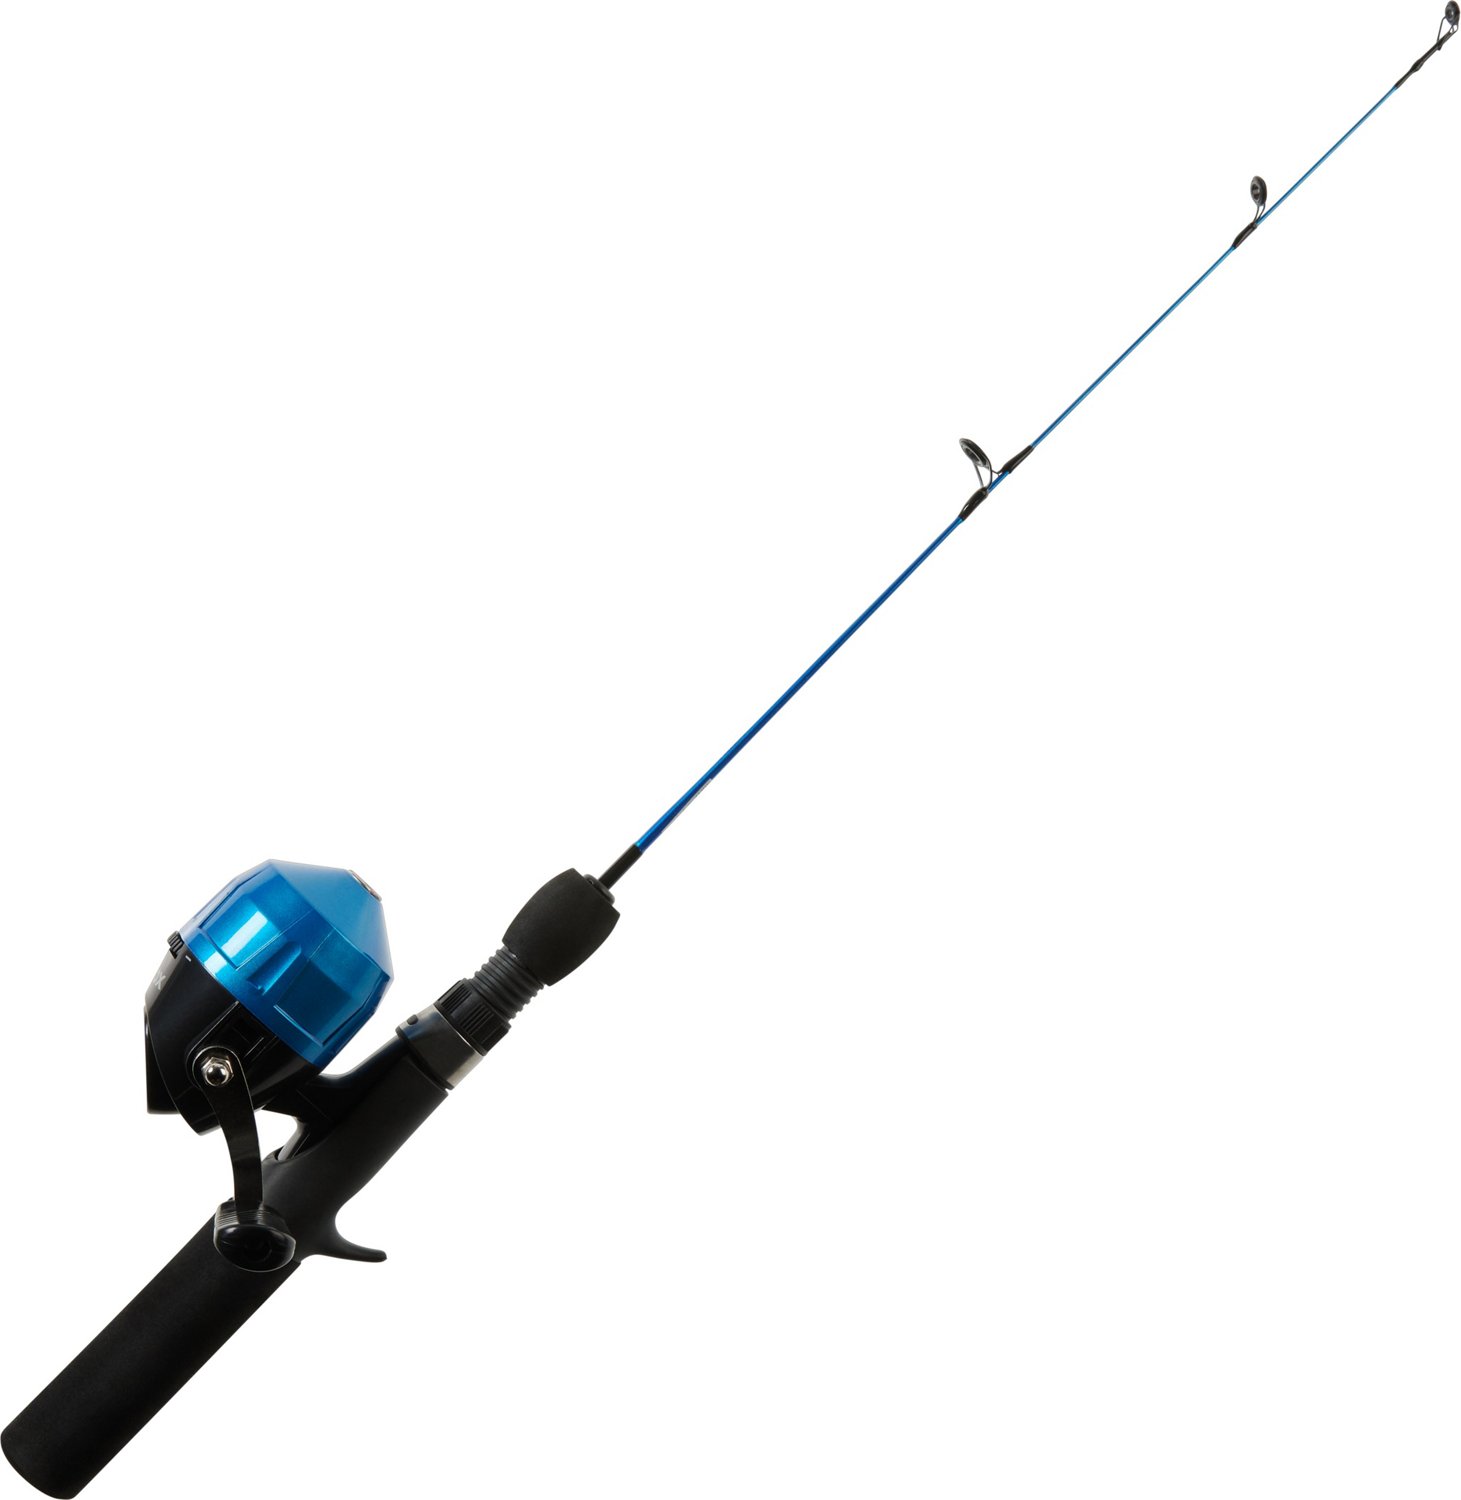 Zebco Big Cat Spinnging Reel and Fishing Rod Combo, Size 60 Reel, 9-Foot  2-Piece Mediuam-Heavy Pole, Pre-Spooled with 20-Pound Fishing Line